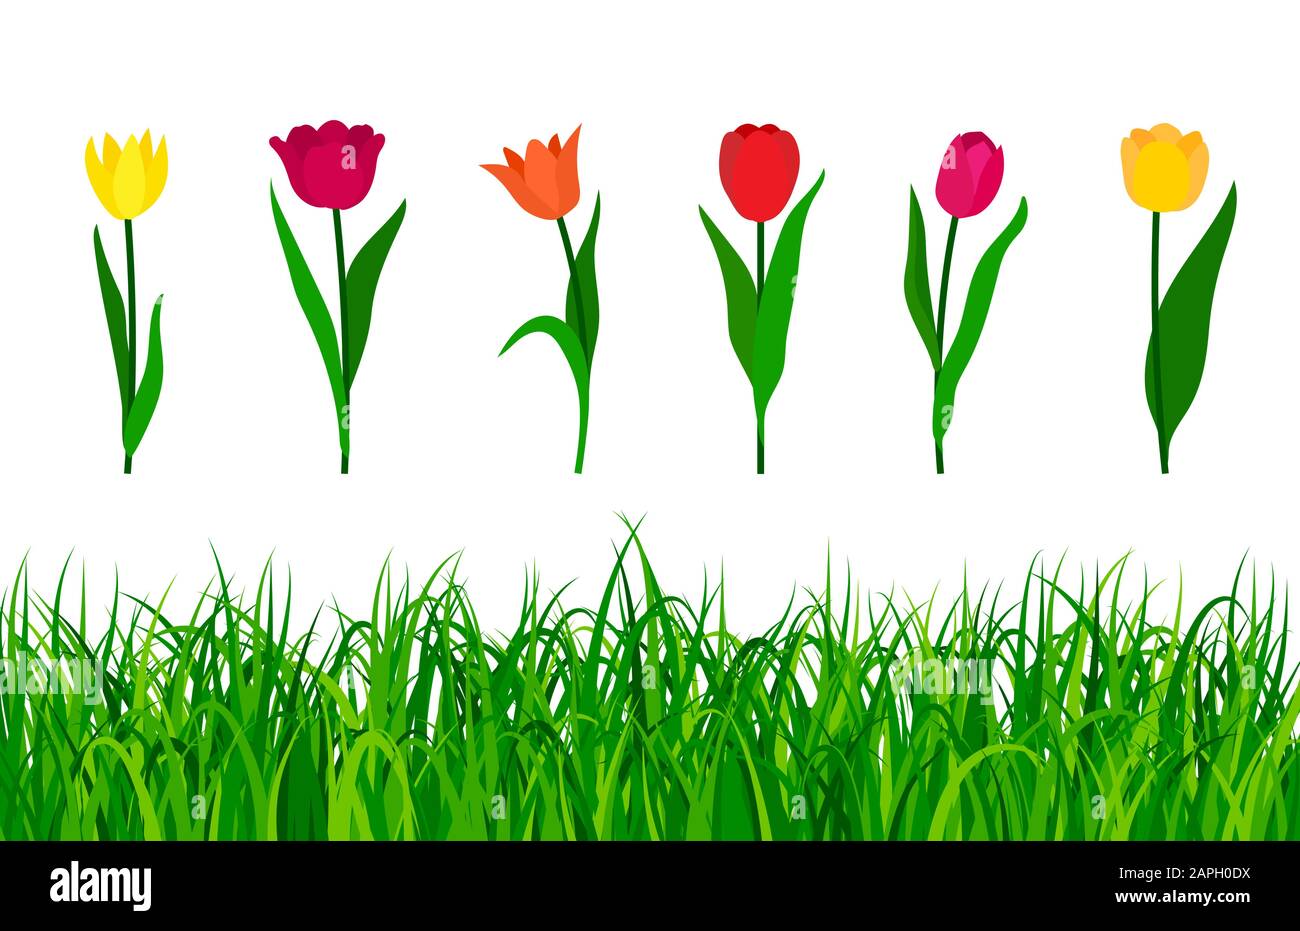 Colorful tulips with green grass isolated on white background. Vector illustration Stock Vector